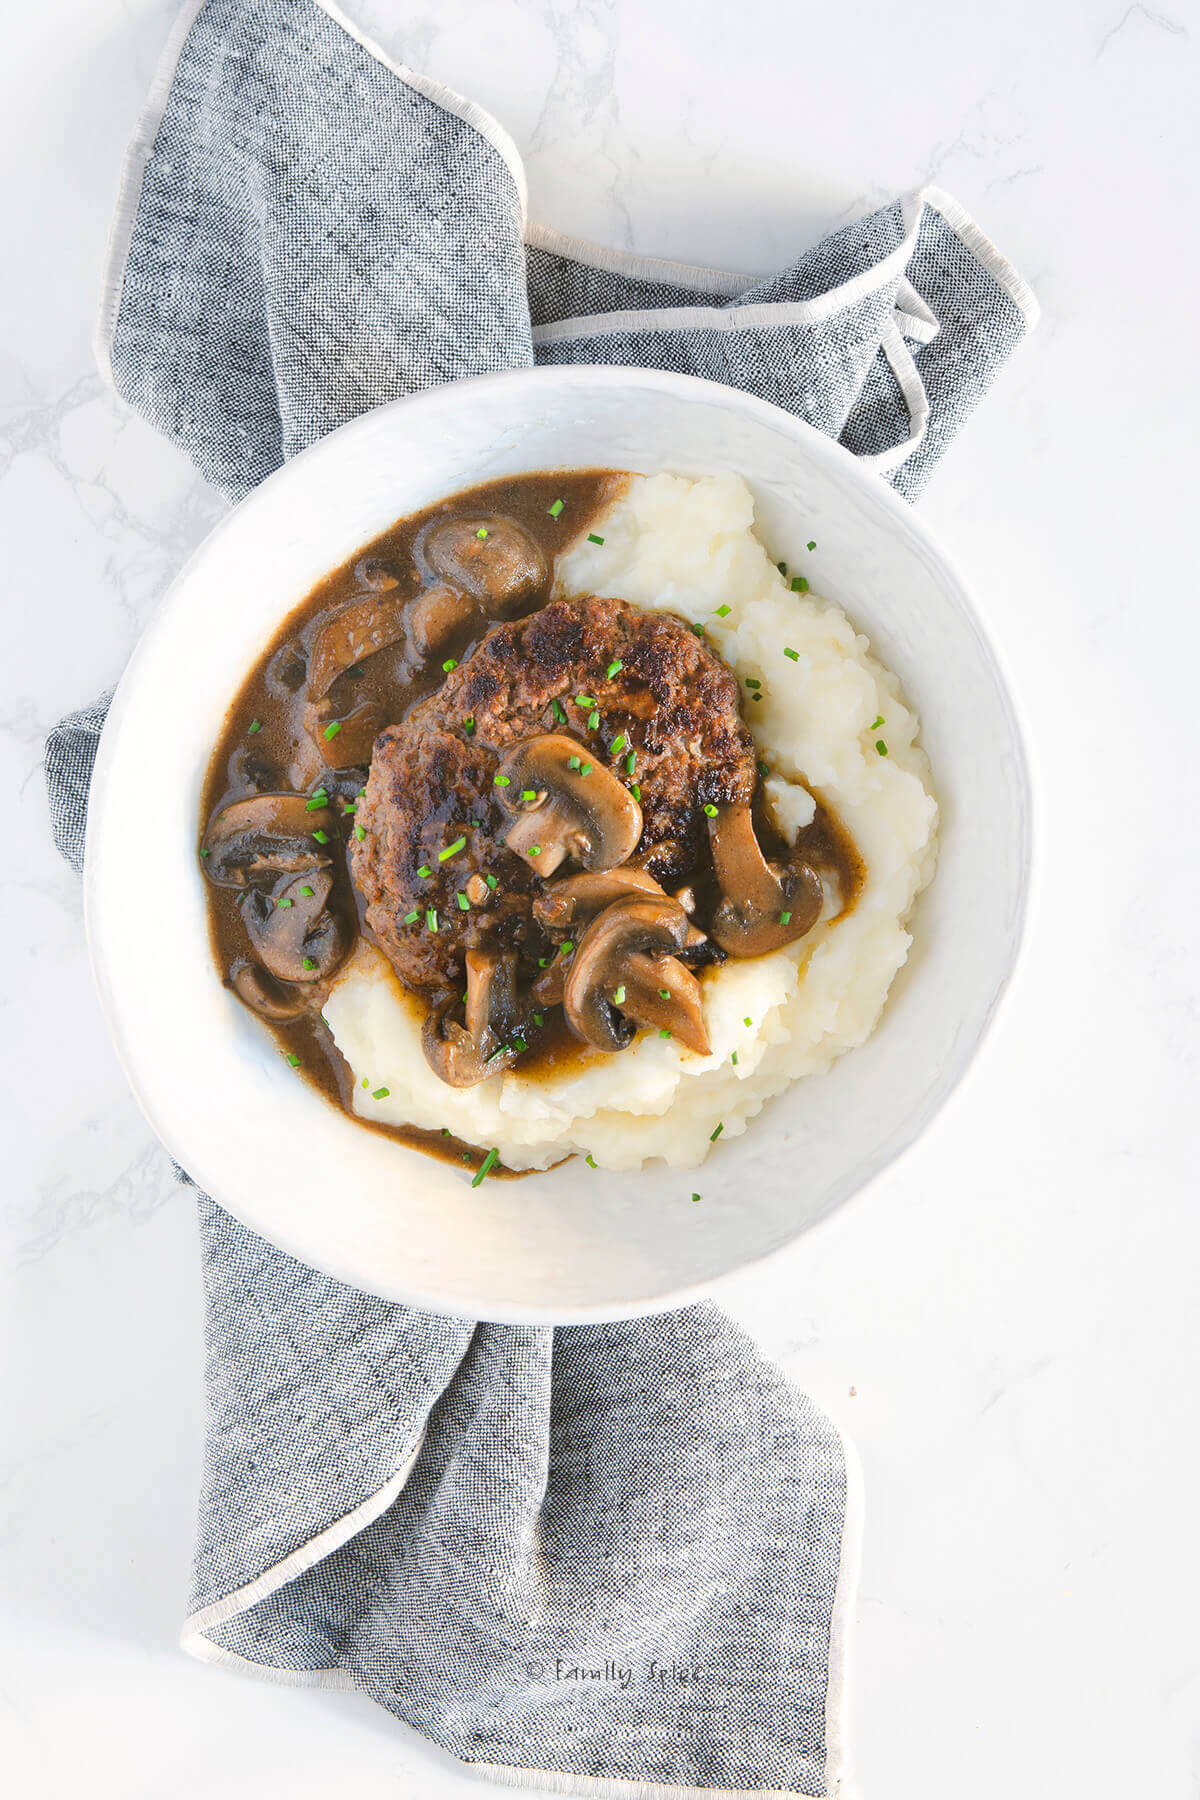 Closeup of a shallow bowl with mashed potatoes and salisbury steak with mushroom gravy